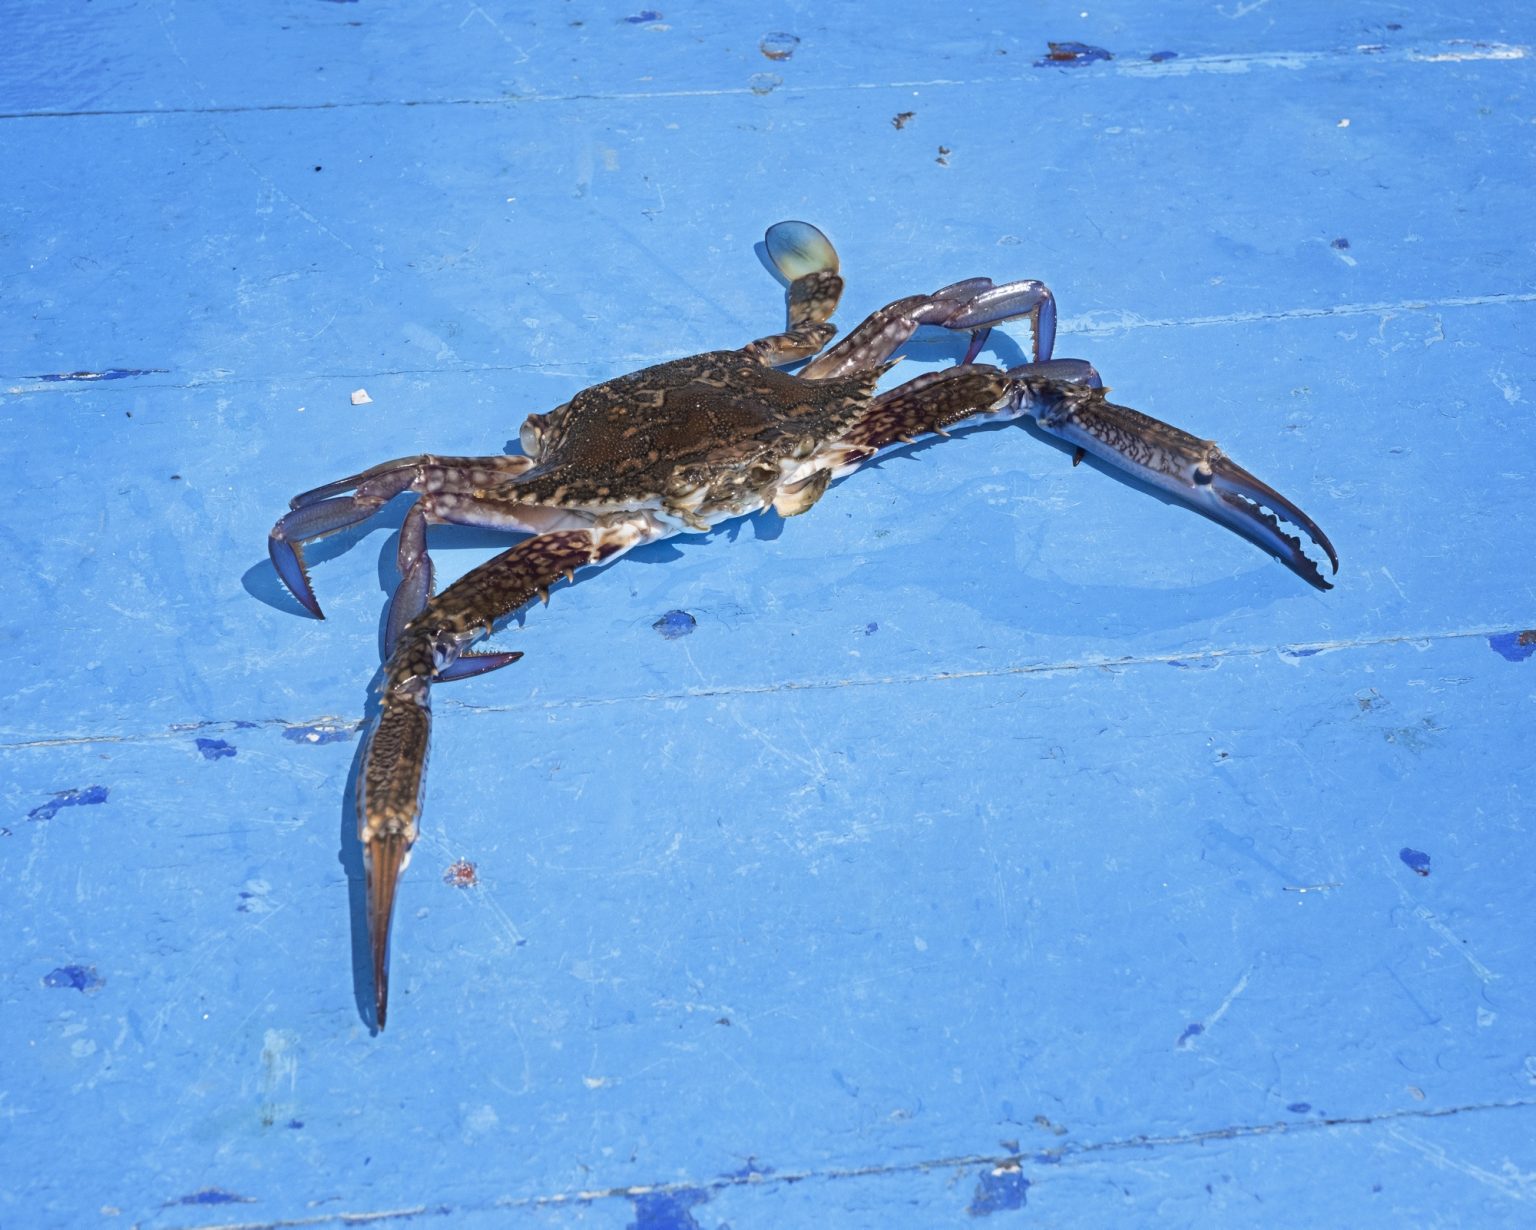 Kerkennah Islands (Tunisia), June 2022 - An ovigerous female of blue crab (Portunus segnis), an invasive alien species from the Red Sea, which arrived in the Gulf of Gabès in 2014, with a population explosion in August 2015, finding favorable conditions for its settlement thanks to the vulnerability of the ecosystem and climate change. Each female can lay more than 2 million eggs during the breeding season in summer. Along with other factors, including pollution and intensive fishing, the blue crab is among the causes that have led to the decline of marine biodiversity in the gulf. Nicknamed 'Daesh' by fishermen because of its devastating impact on the marine ecosystem and on fishing nets that are cut by the power of the claws and the spines around them, this crab feeds on many of the marine species present in the gulf, mainly crustaceans, molluscs and fish. It is assumed that the route of introduction into the Mediterranean was that of maritime traffic, within the ballast waters of the ships.
><
Isole Kerkennah (Tunisia), giugno 2022 - Una femmina ovigera di granchio blu (Portunus segnis), una specie aliena invasiva proveniente dal Mar Rosso, arrivata nel Golfo di Gabès nel 2014, con unesplosione demografica nellagosto del 2015, trovando condizioni favorevoli al suo insediamento grazie alla vulnerabilità dellecosistema e ai cambiamenti climatici. Ogni femmina può deporre più di 2 milioni di uova durante la stagione riproduttiva in estate. Insieme ad altri fattori, tra cui linquinamento e la pesca intensiva, il granchio blu è tra le cause che hanno portato al declino della biodiversità marina nel golfo. Soprannominato dai pescatori Daesh a causa del suo impatto devastante sullecosistema e sulle reti da pesca, che vengono tagliate dalle potenza delle chele e dalle spine presenti attorno ad esse, questo granchio si ciba di molte delle specie marine presenti nel golfo, principalmente crostacei, molluschi e pesci. Si ipotizza che la via di in